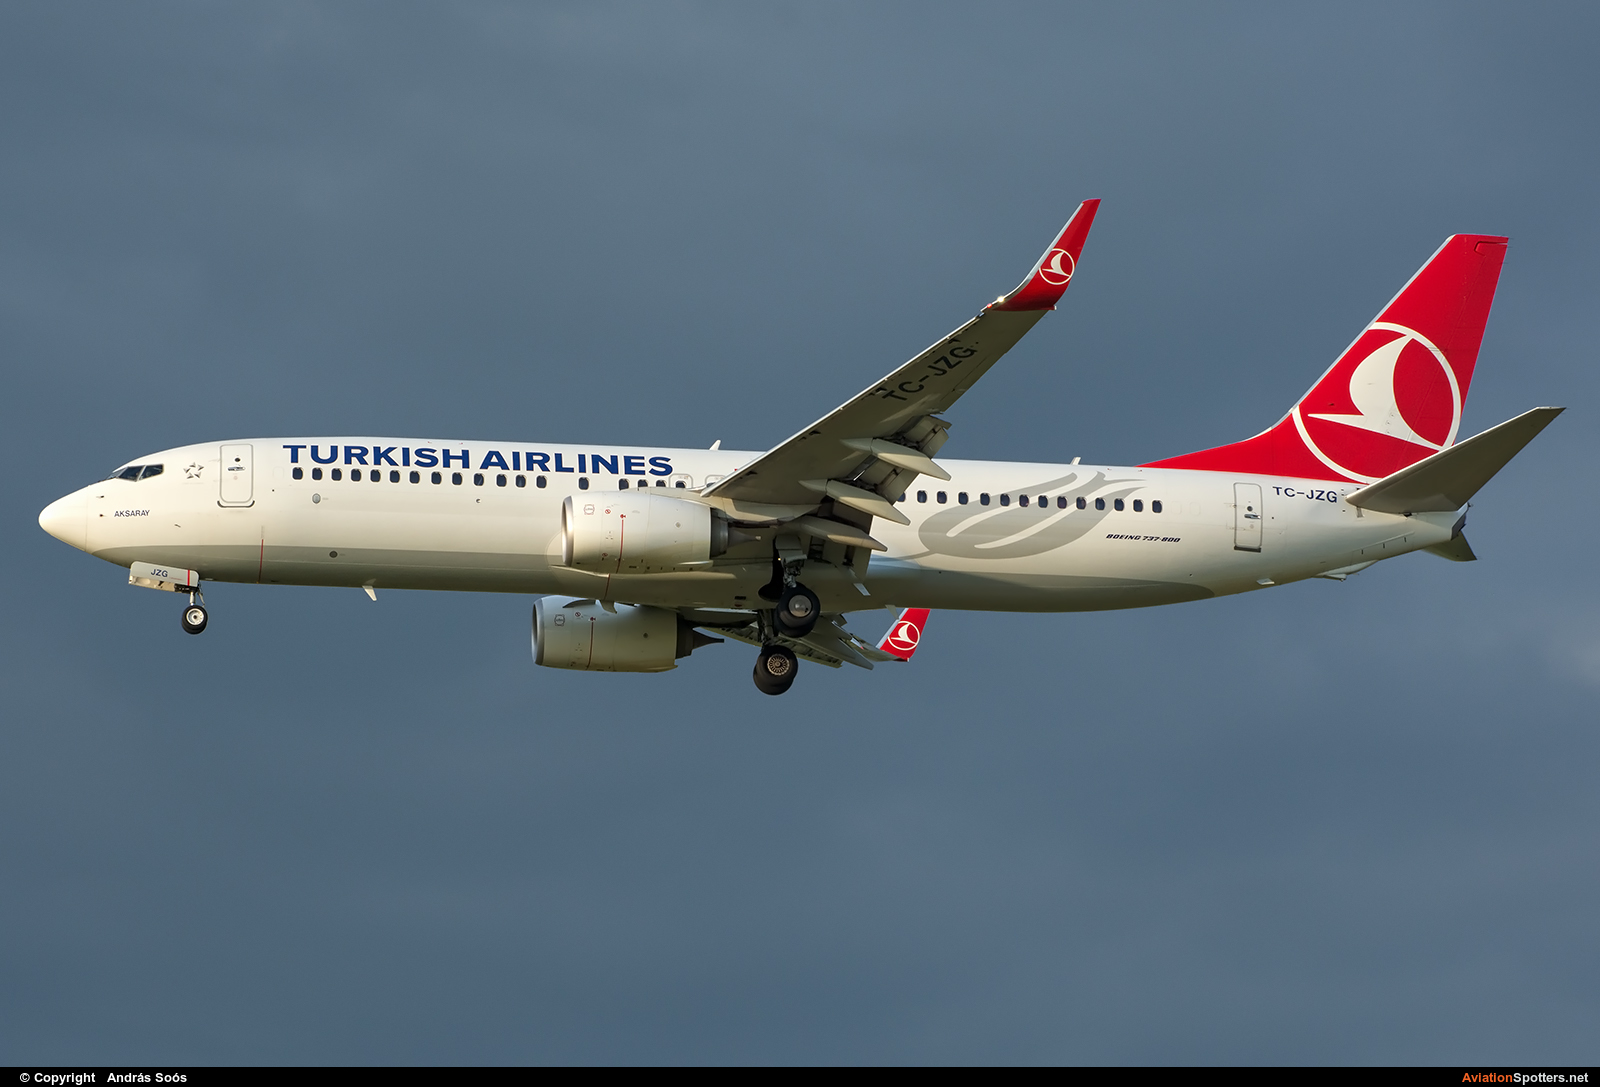 Turkish Airlines  -  737-800  (TC-JZG) By András Soós (sas1965)